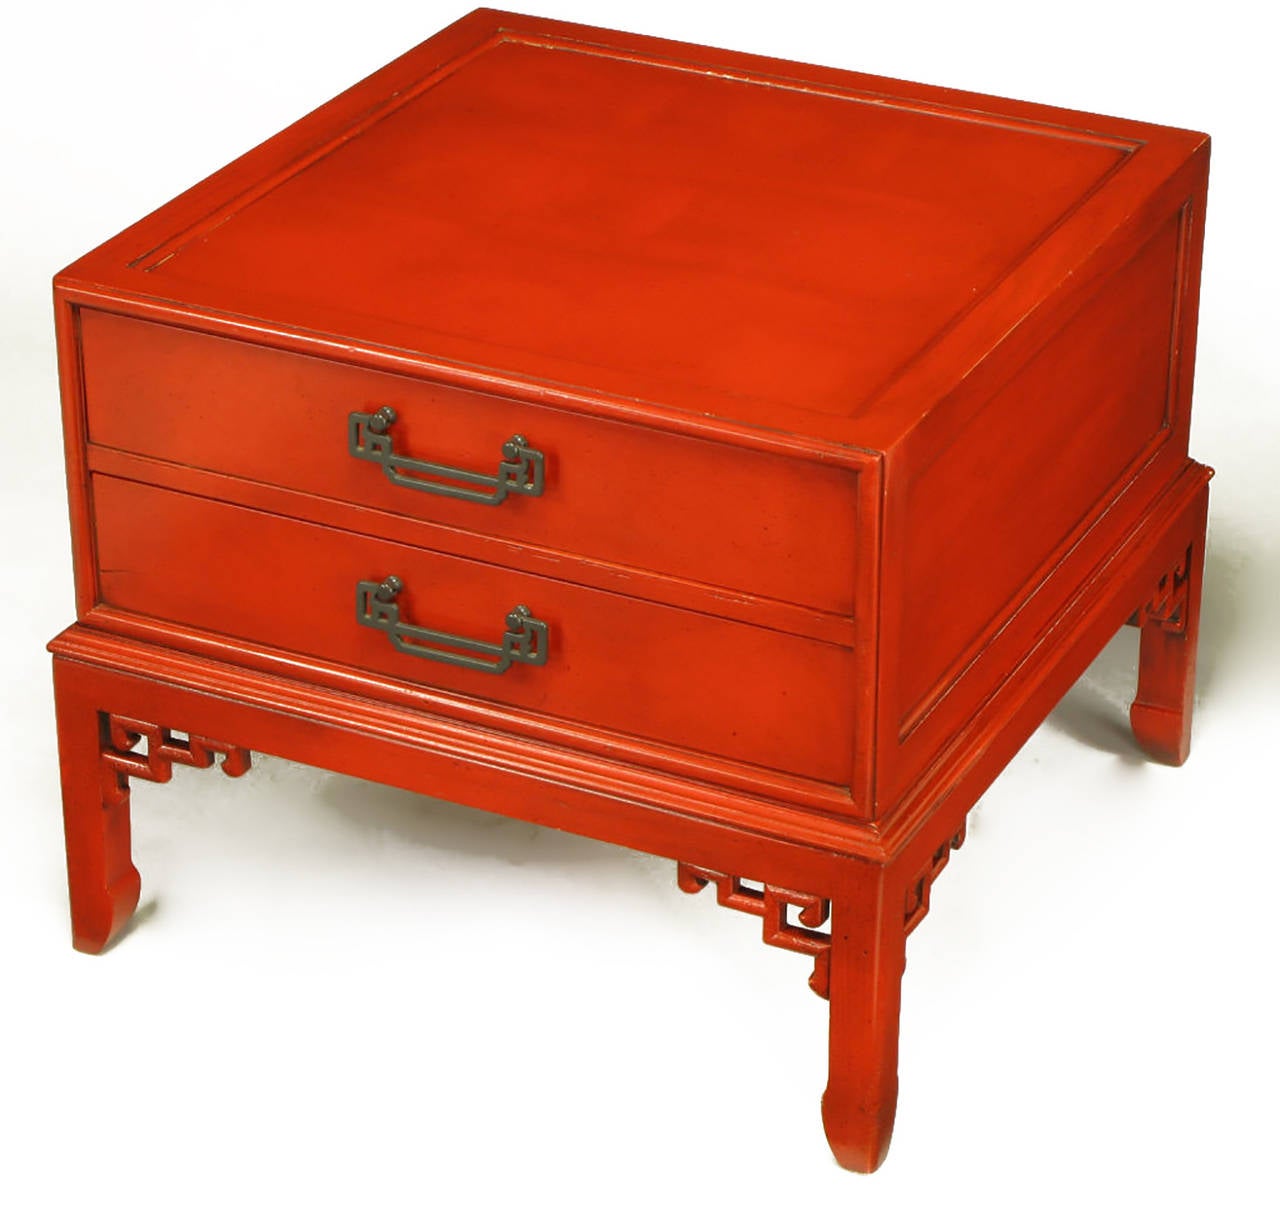 Hekman Furniture two-drawer side table in cinnabar lacquer with black glazed finish. Recessed top and the appearance of a two-drawer case mounted on a Ming style leg open fretwork and bracketed base. Patinated brass Asian form drop pulls.